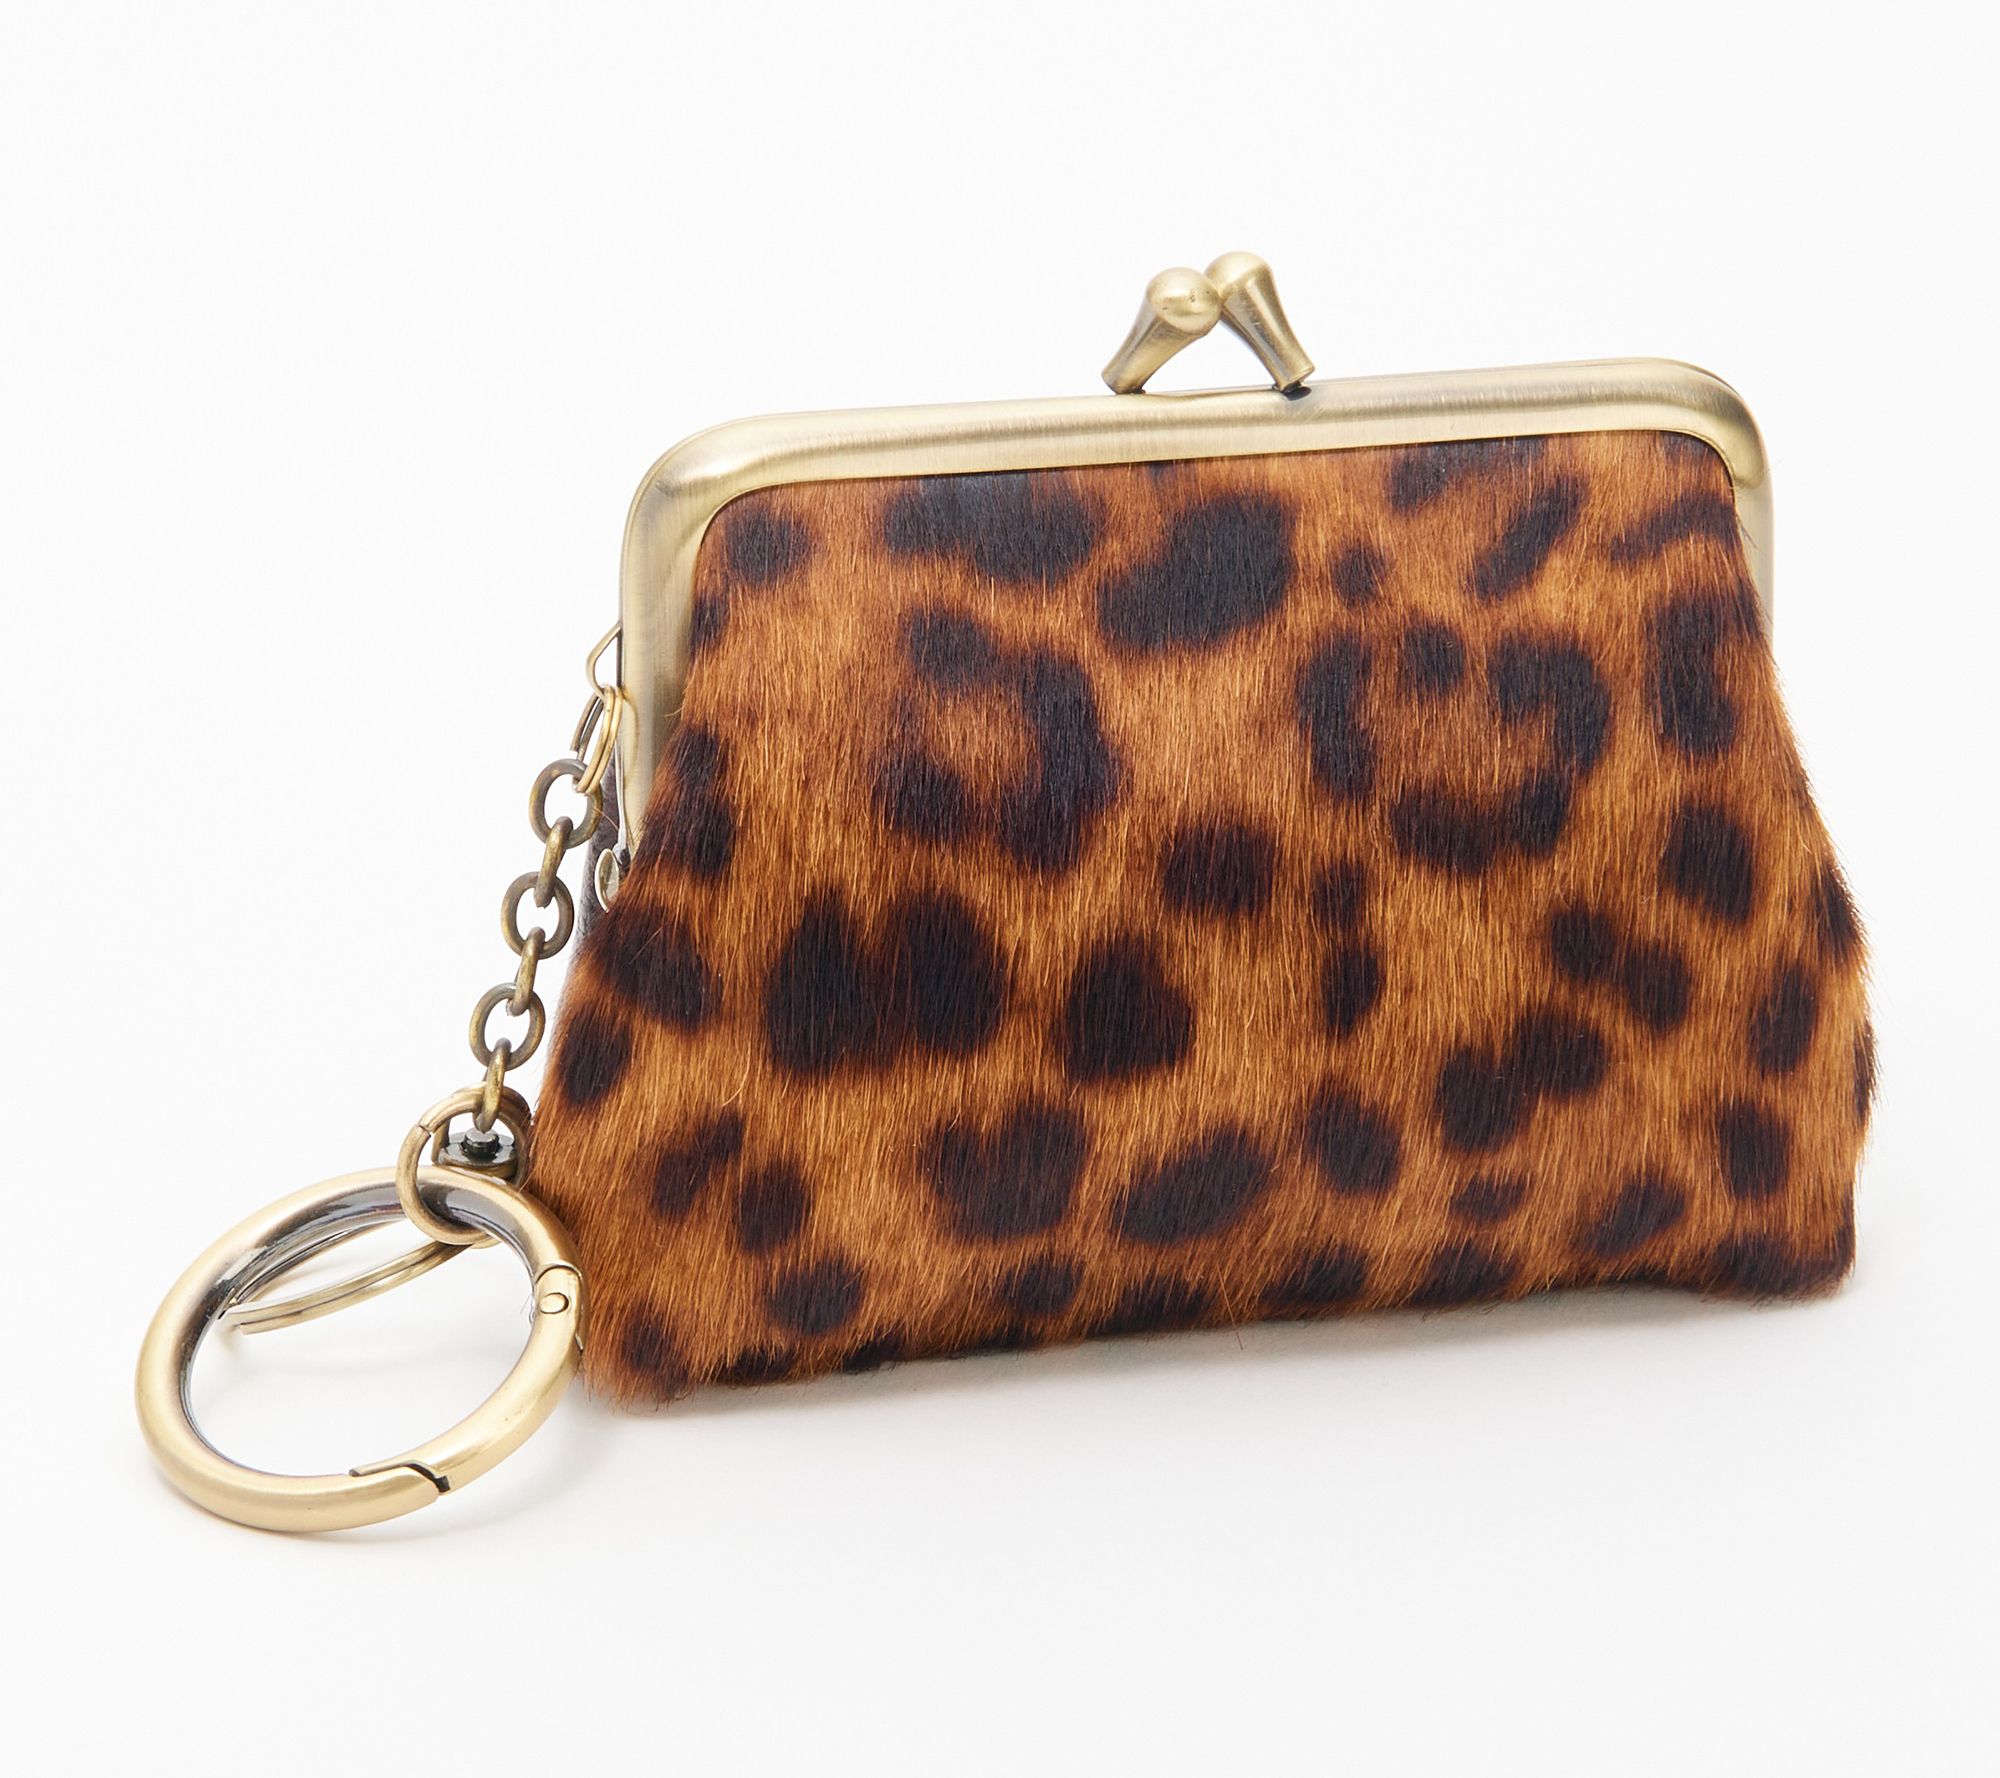 Clutch Purse in Soft Snow Leopard Print Faux Fur with Silver Metal Frame